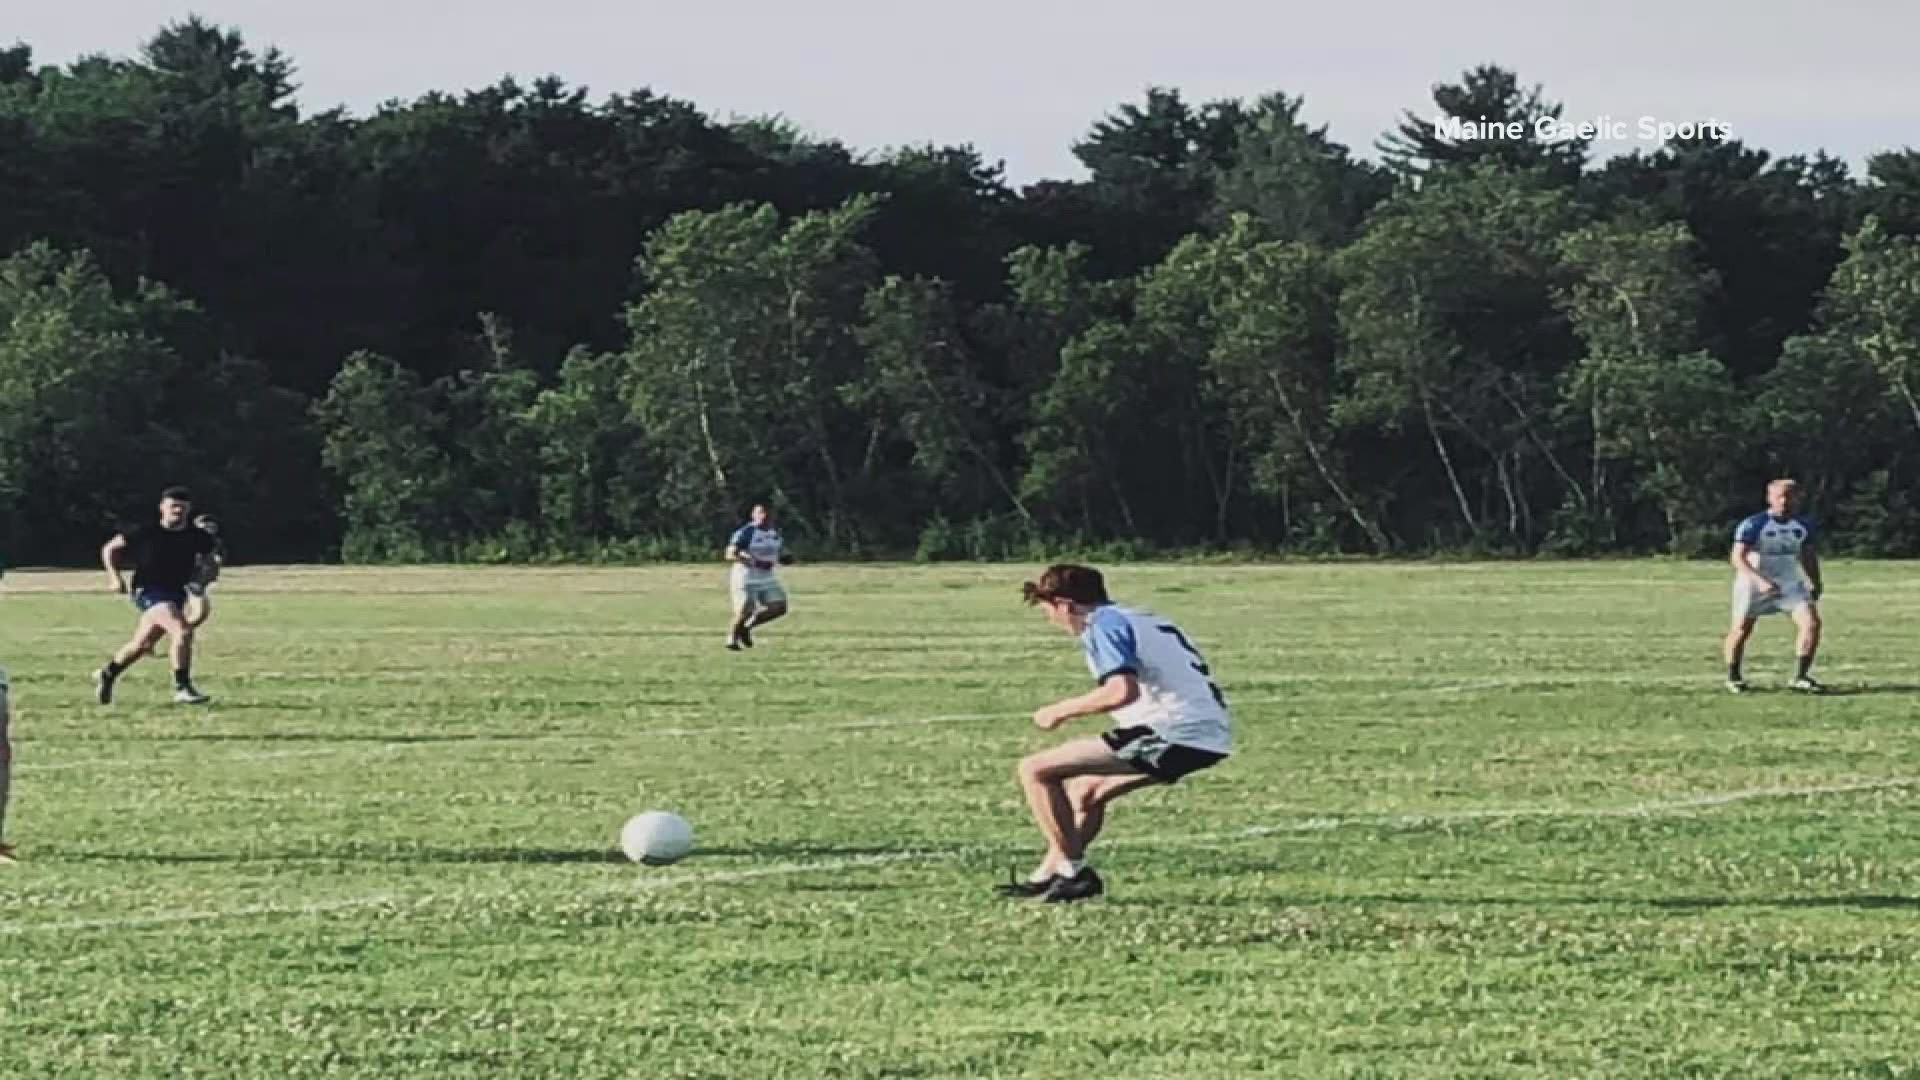 Now -- Maine Gaelic Sports is offering high school boys a do-over of their 2020 football season -- but instead of American football -- it will be Gaelic football.